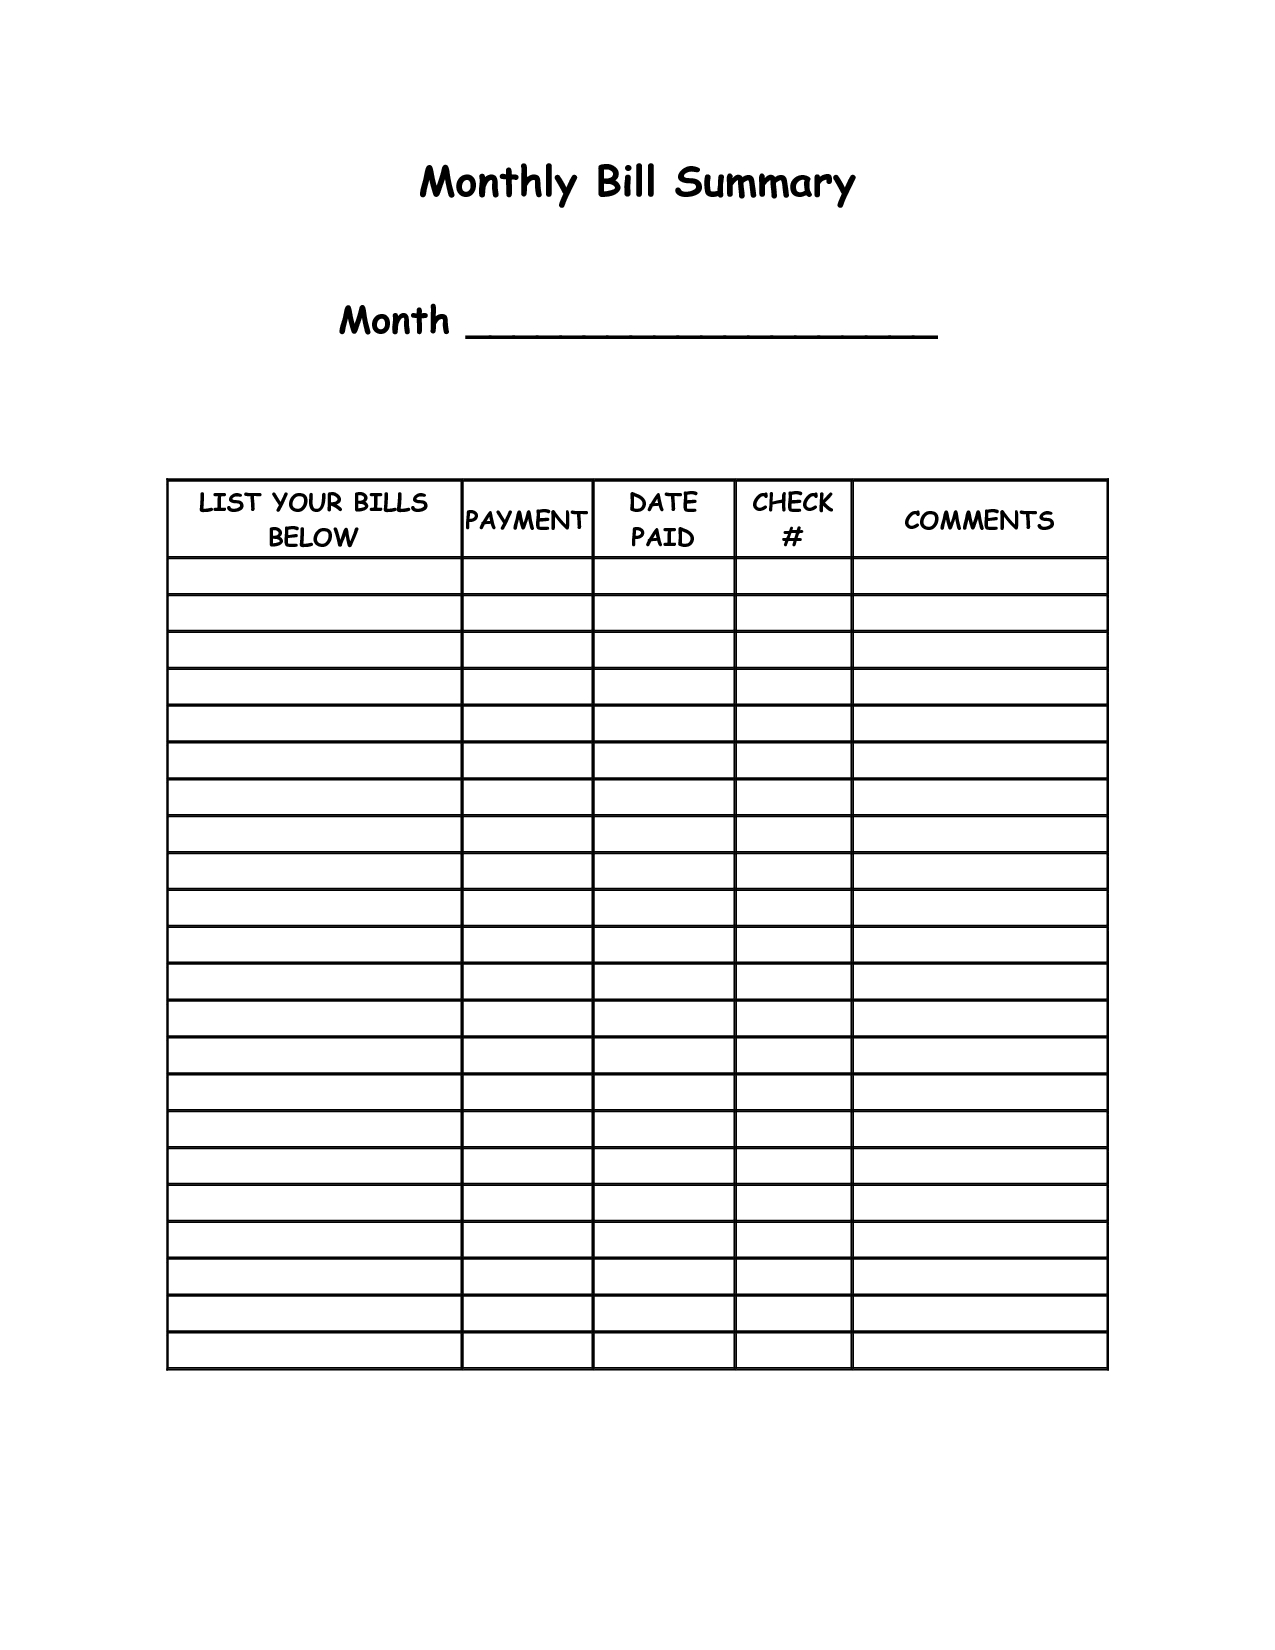 Monthly Bill Summary Doc | Monthly Bill, Organizing Monthly  Bill Worksheet Template